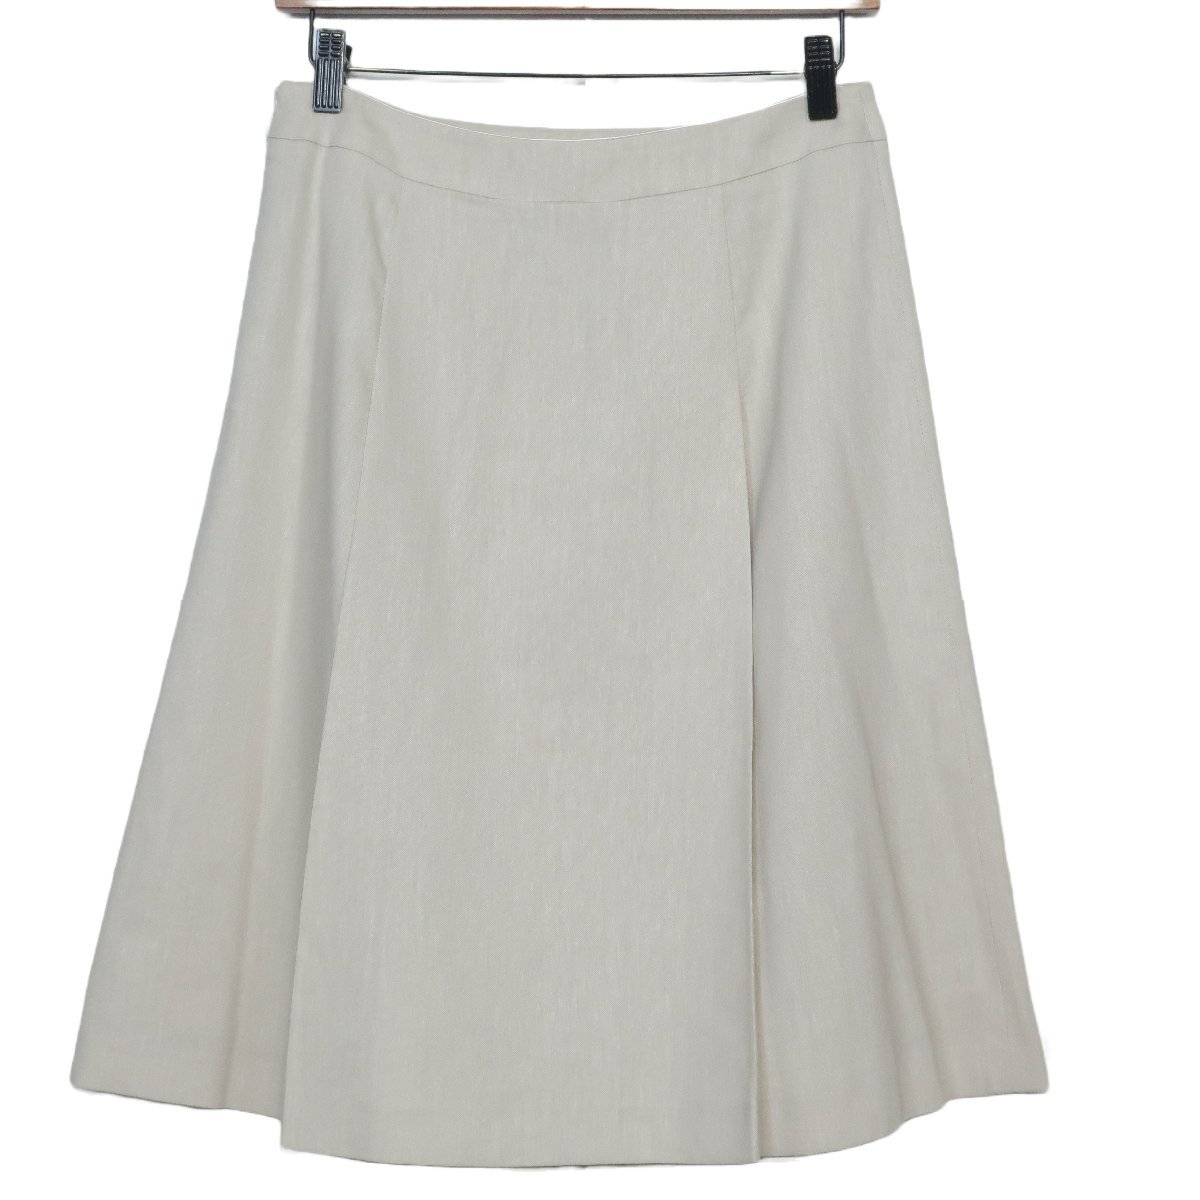  Keith * skirt box pleat large size 40 flax . beige group z3905